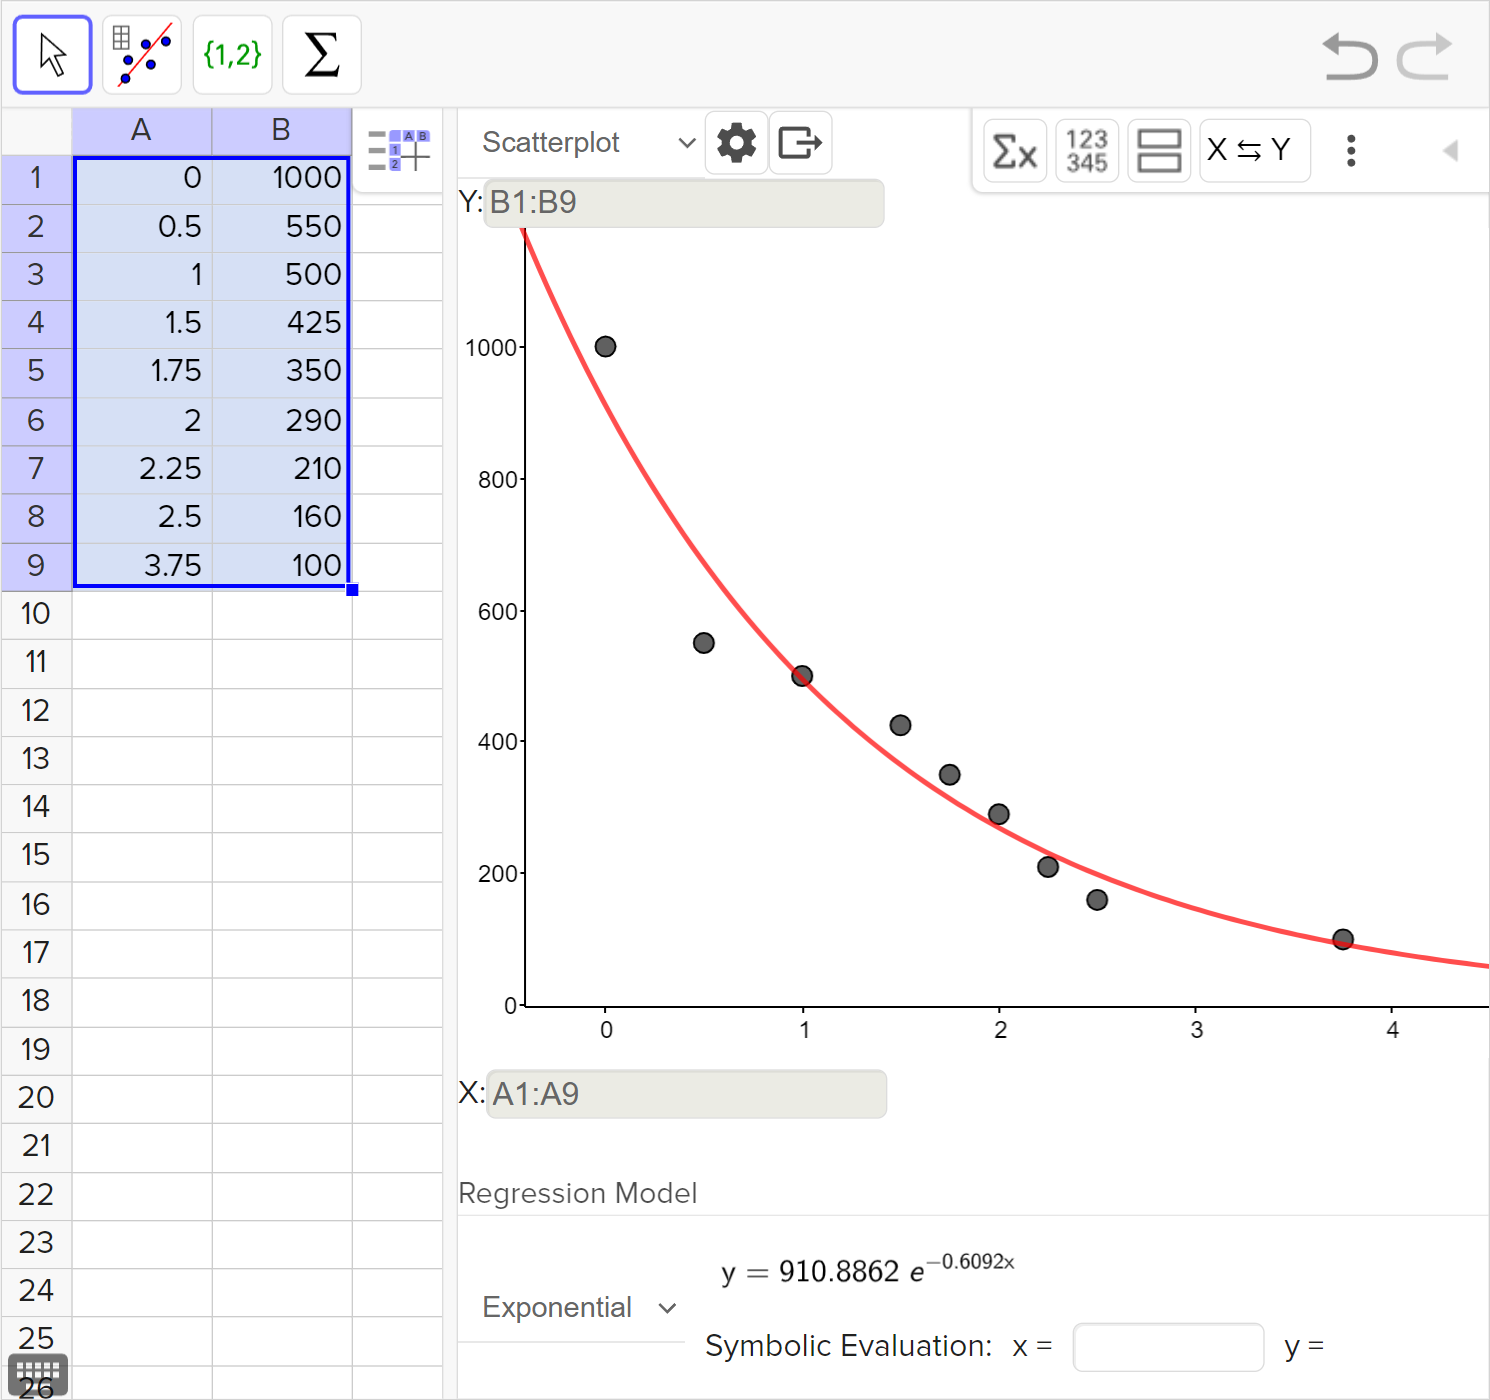 A screenshot of the GeoGebra statistics tool showing the following: On the left side: the numbers 0, 0.5, 1, 1.5, 1.75, 2, 2.25, 2.5, and 3.75 in column A, rows 1 to 9 and the numbers 1000, 550, 500, 425, 350, 290, 210, 160, and 100 in column B, rows 1 to 9. The cells from column A, rows 1 to 9, and column B, rows 1 to 9, are selected. On the right side: a scatterplot and the best fit curve are shown. Speak to your teacher for more details.